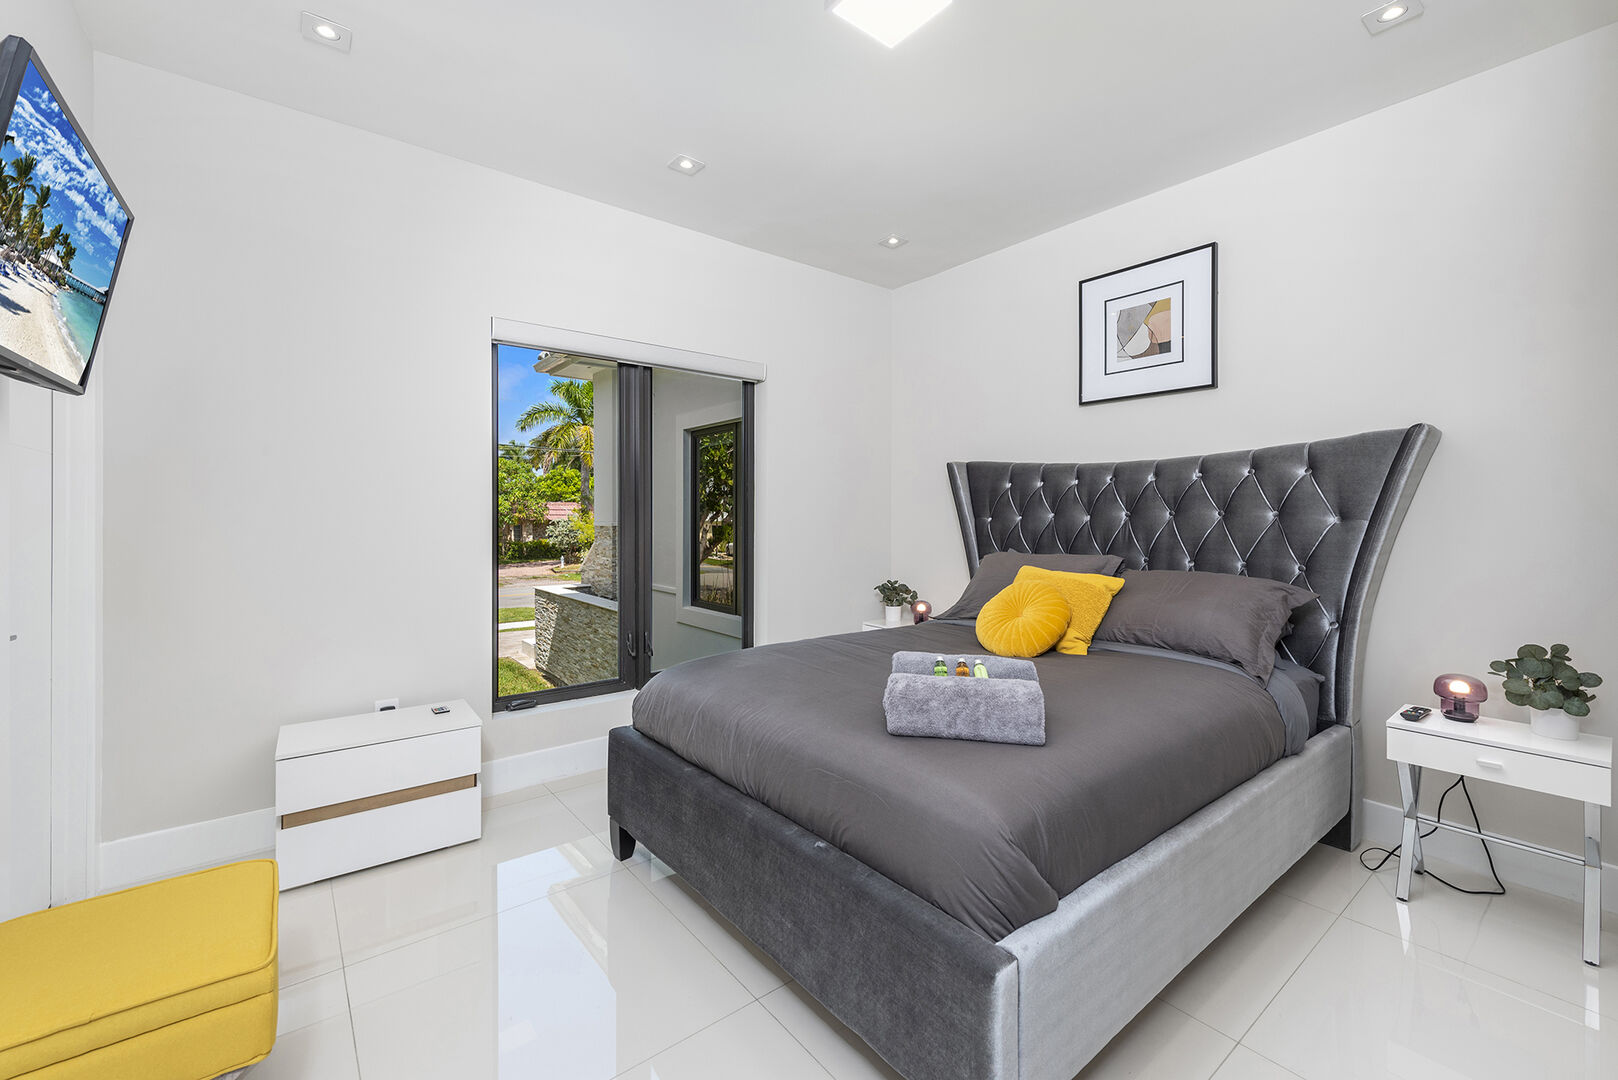 The fifth bedroom with lots of natural light features a king size bed and ensuite bathroom.